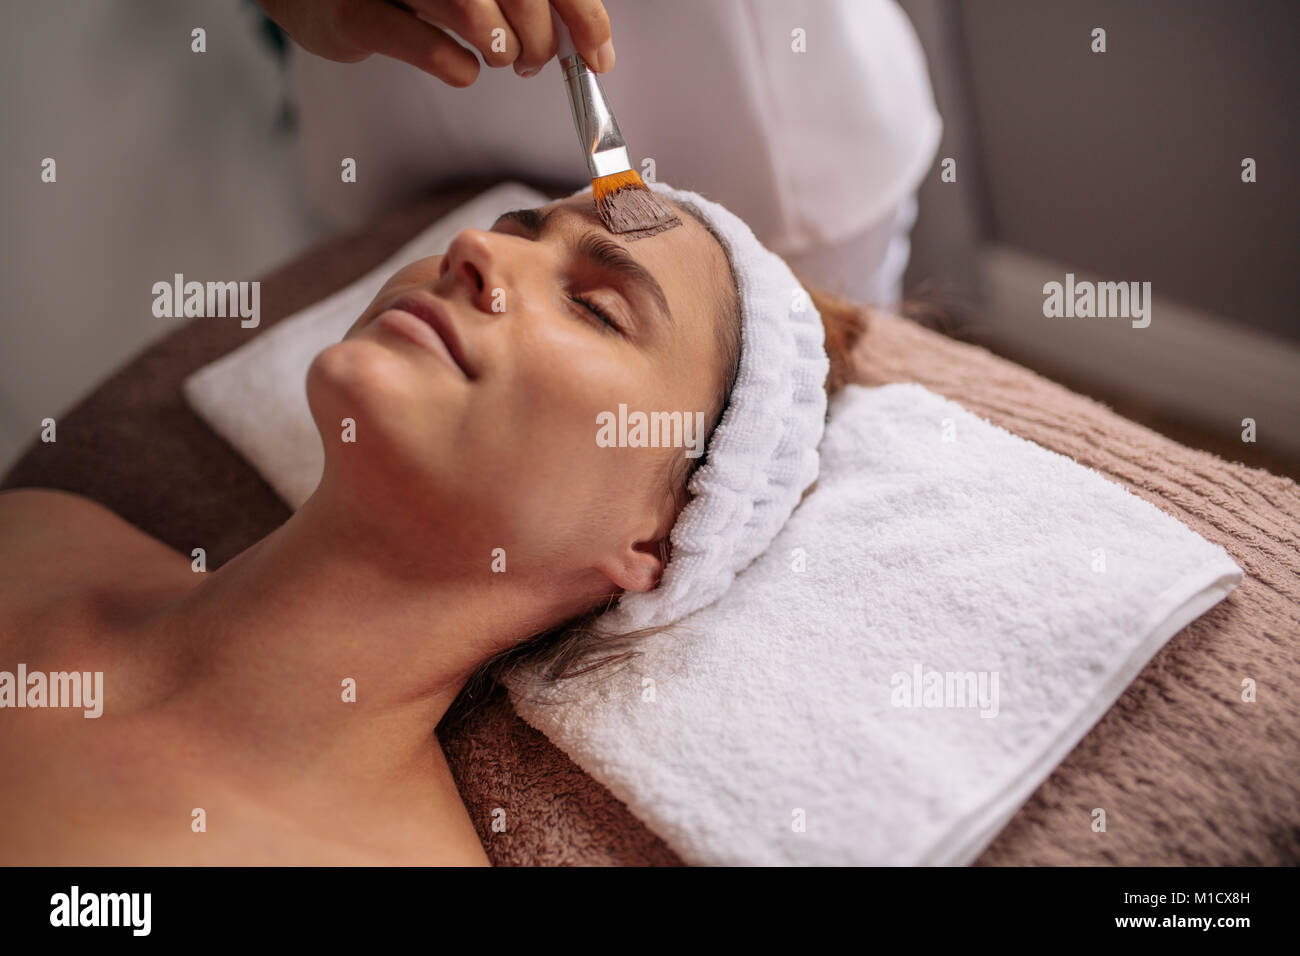 Woman getting facial nourishing mask by beautician at spa salon. Caucasian female receiving a face mask treatment in a beauty center by therapist. Stock Photo